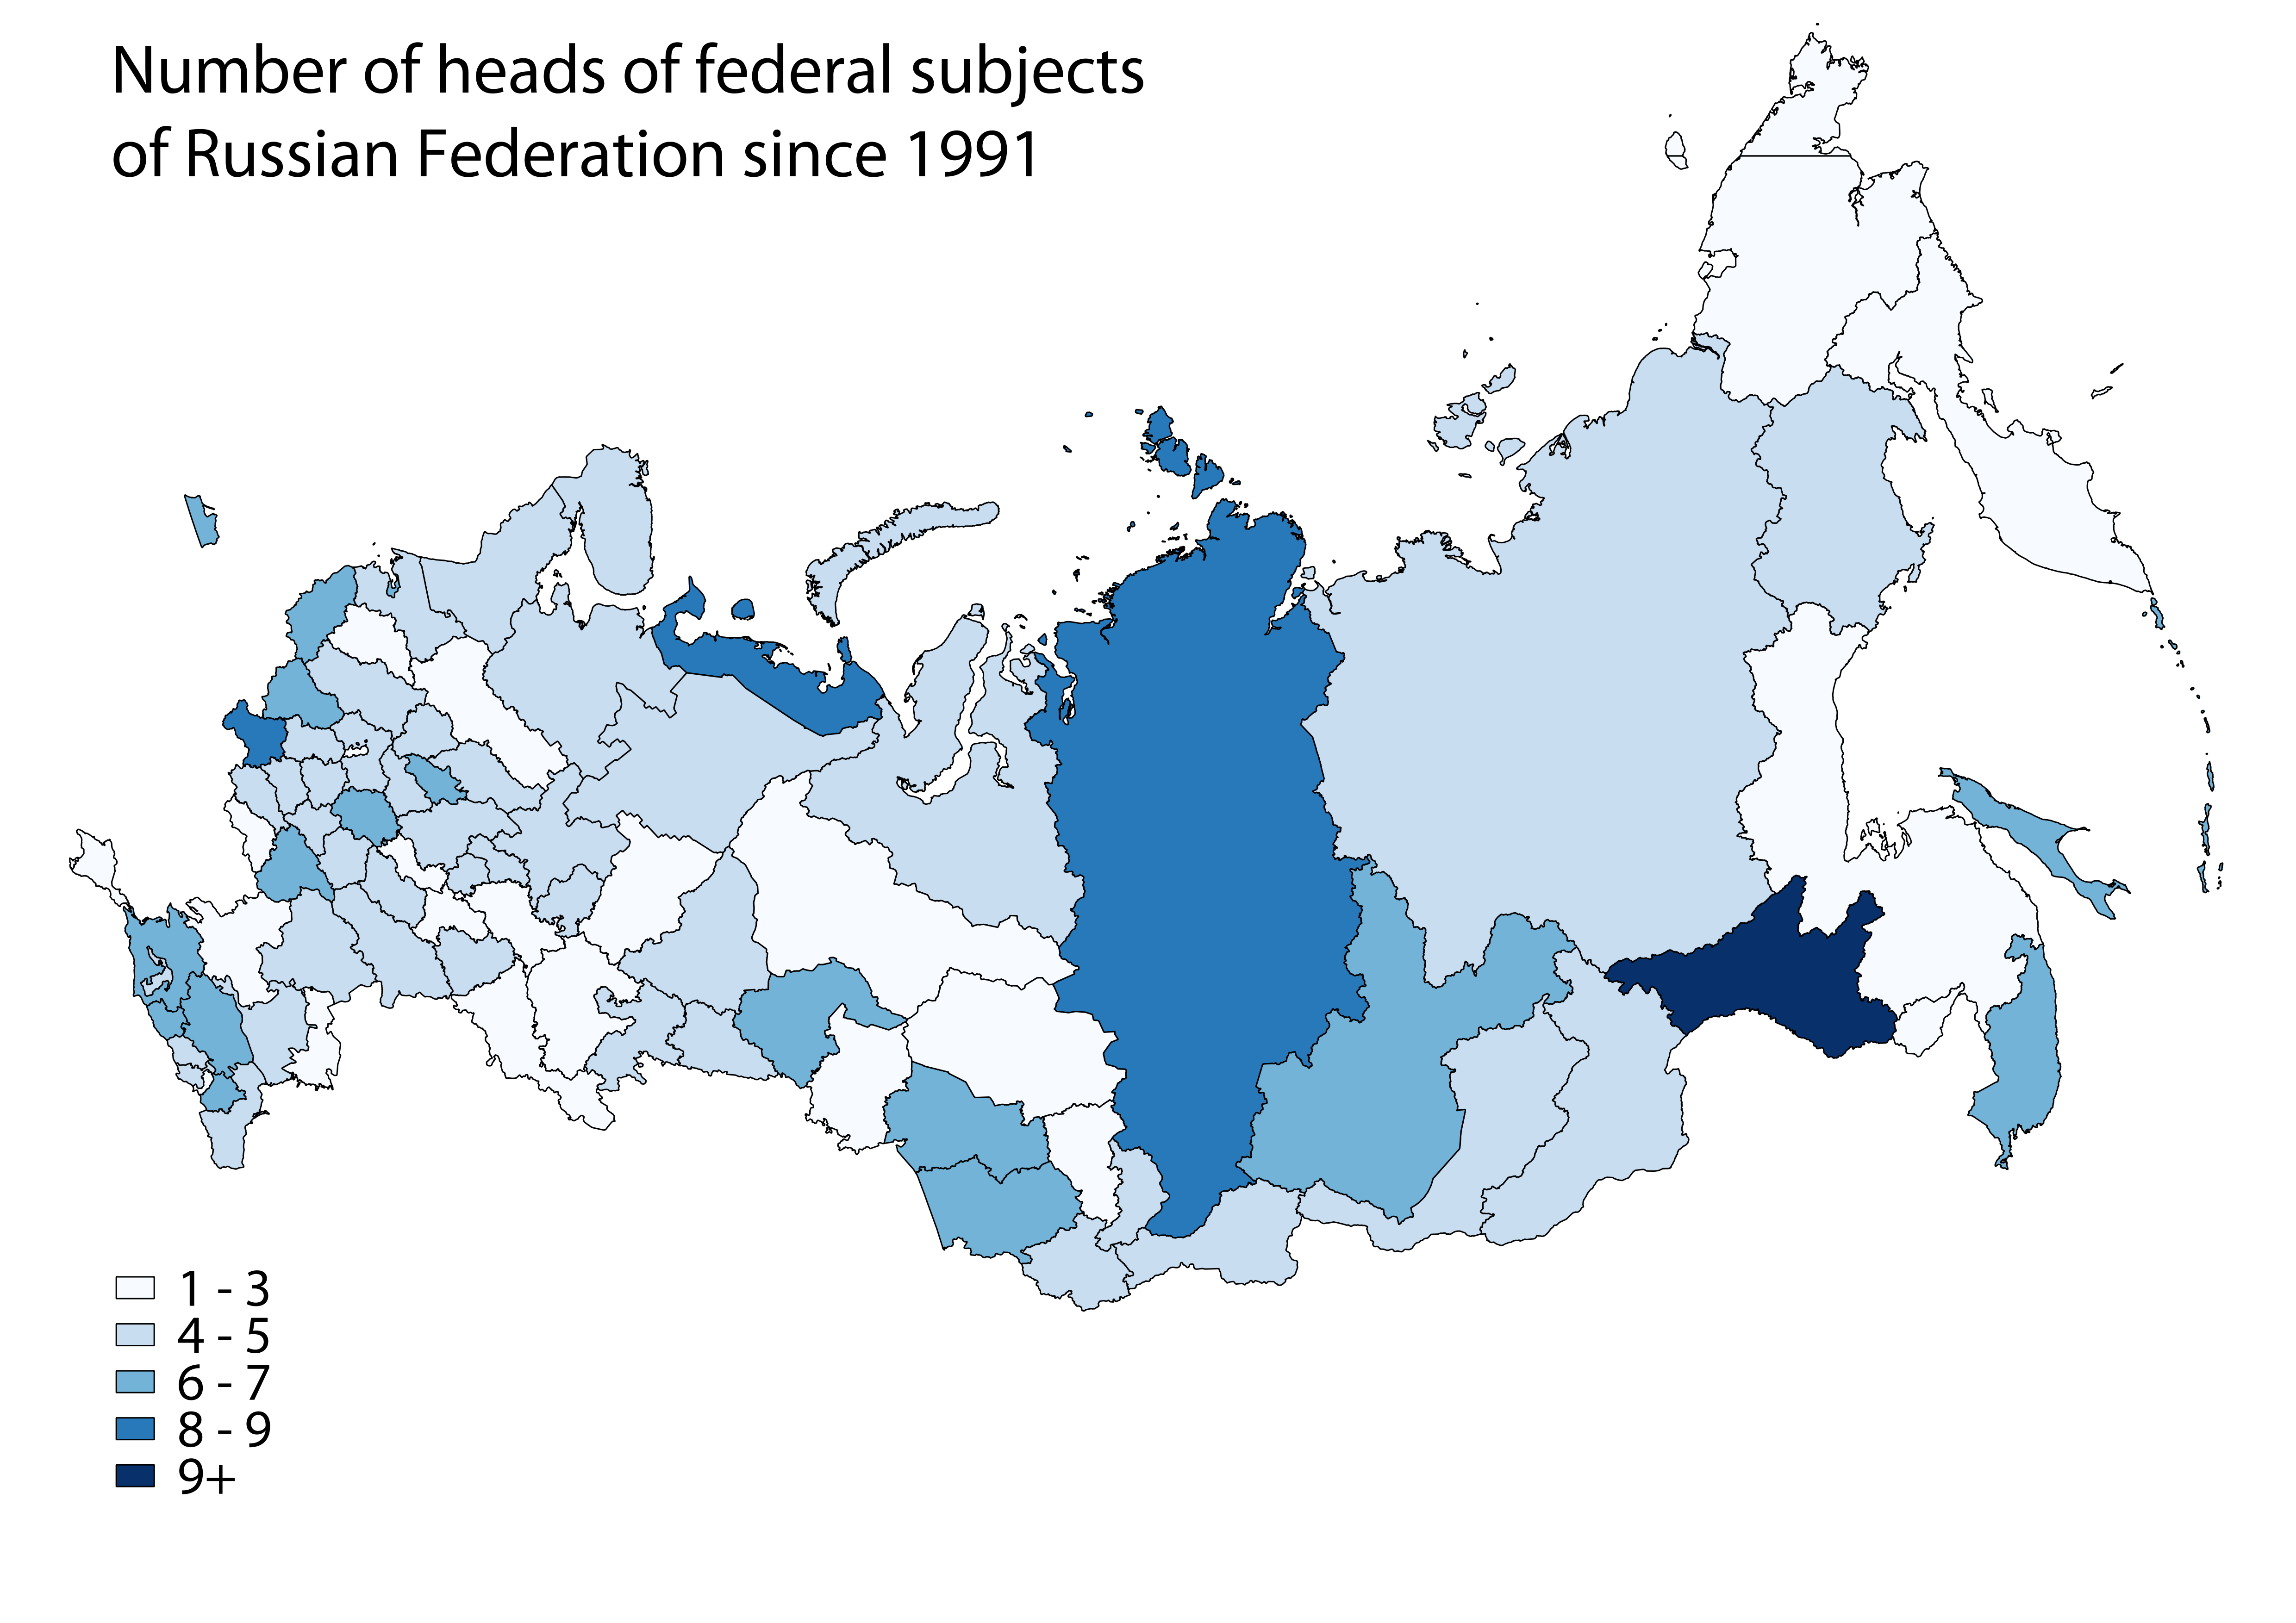 Subjects of russia. Federal subjects of Russia. The Federal subjects of the Russian Federation. Map of Russia Federal Districts. Russian Federation 1991 карта.